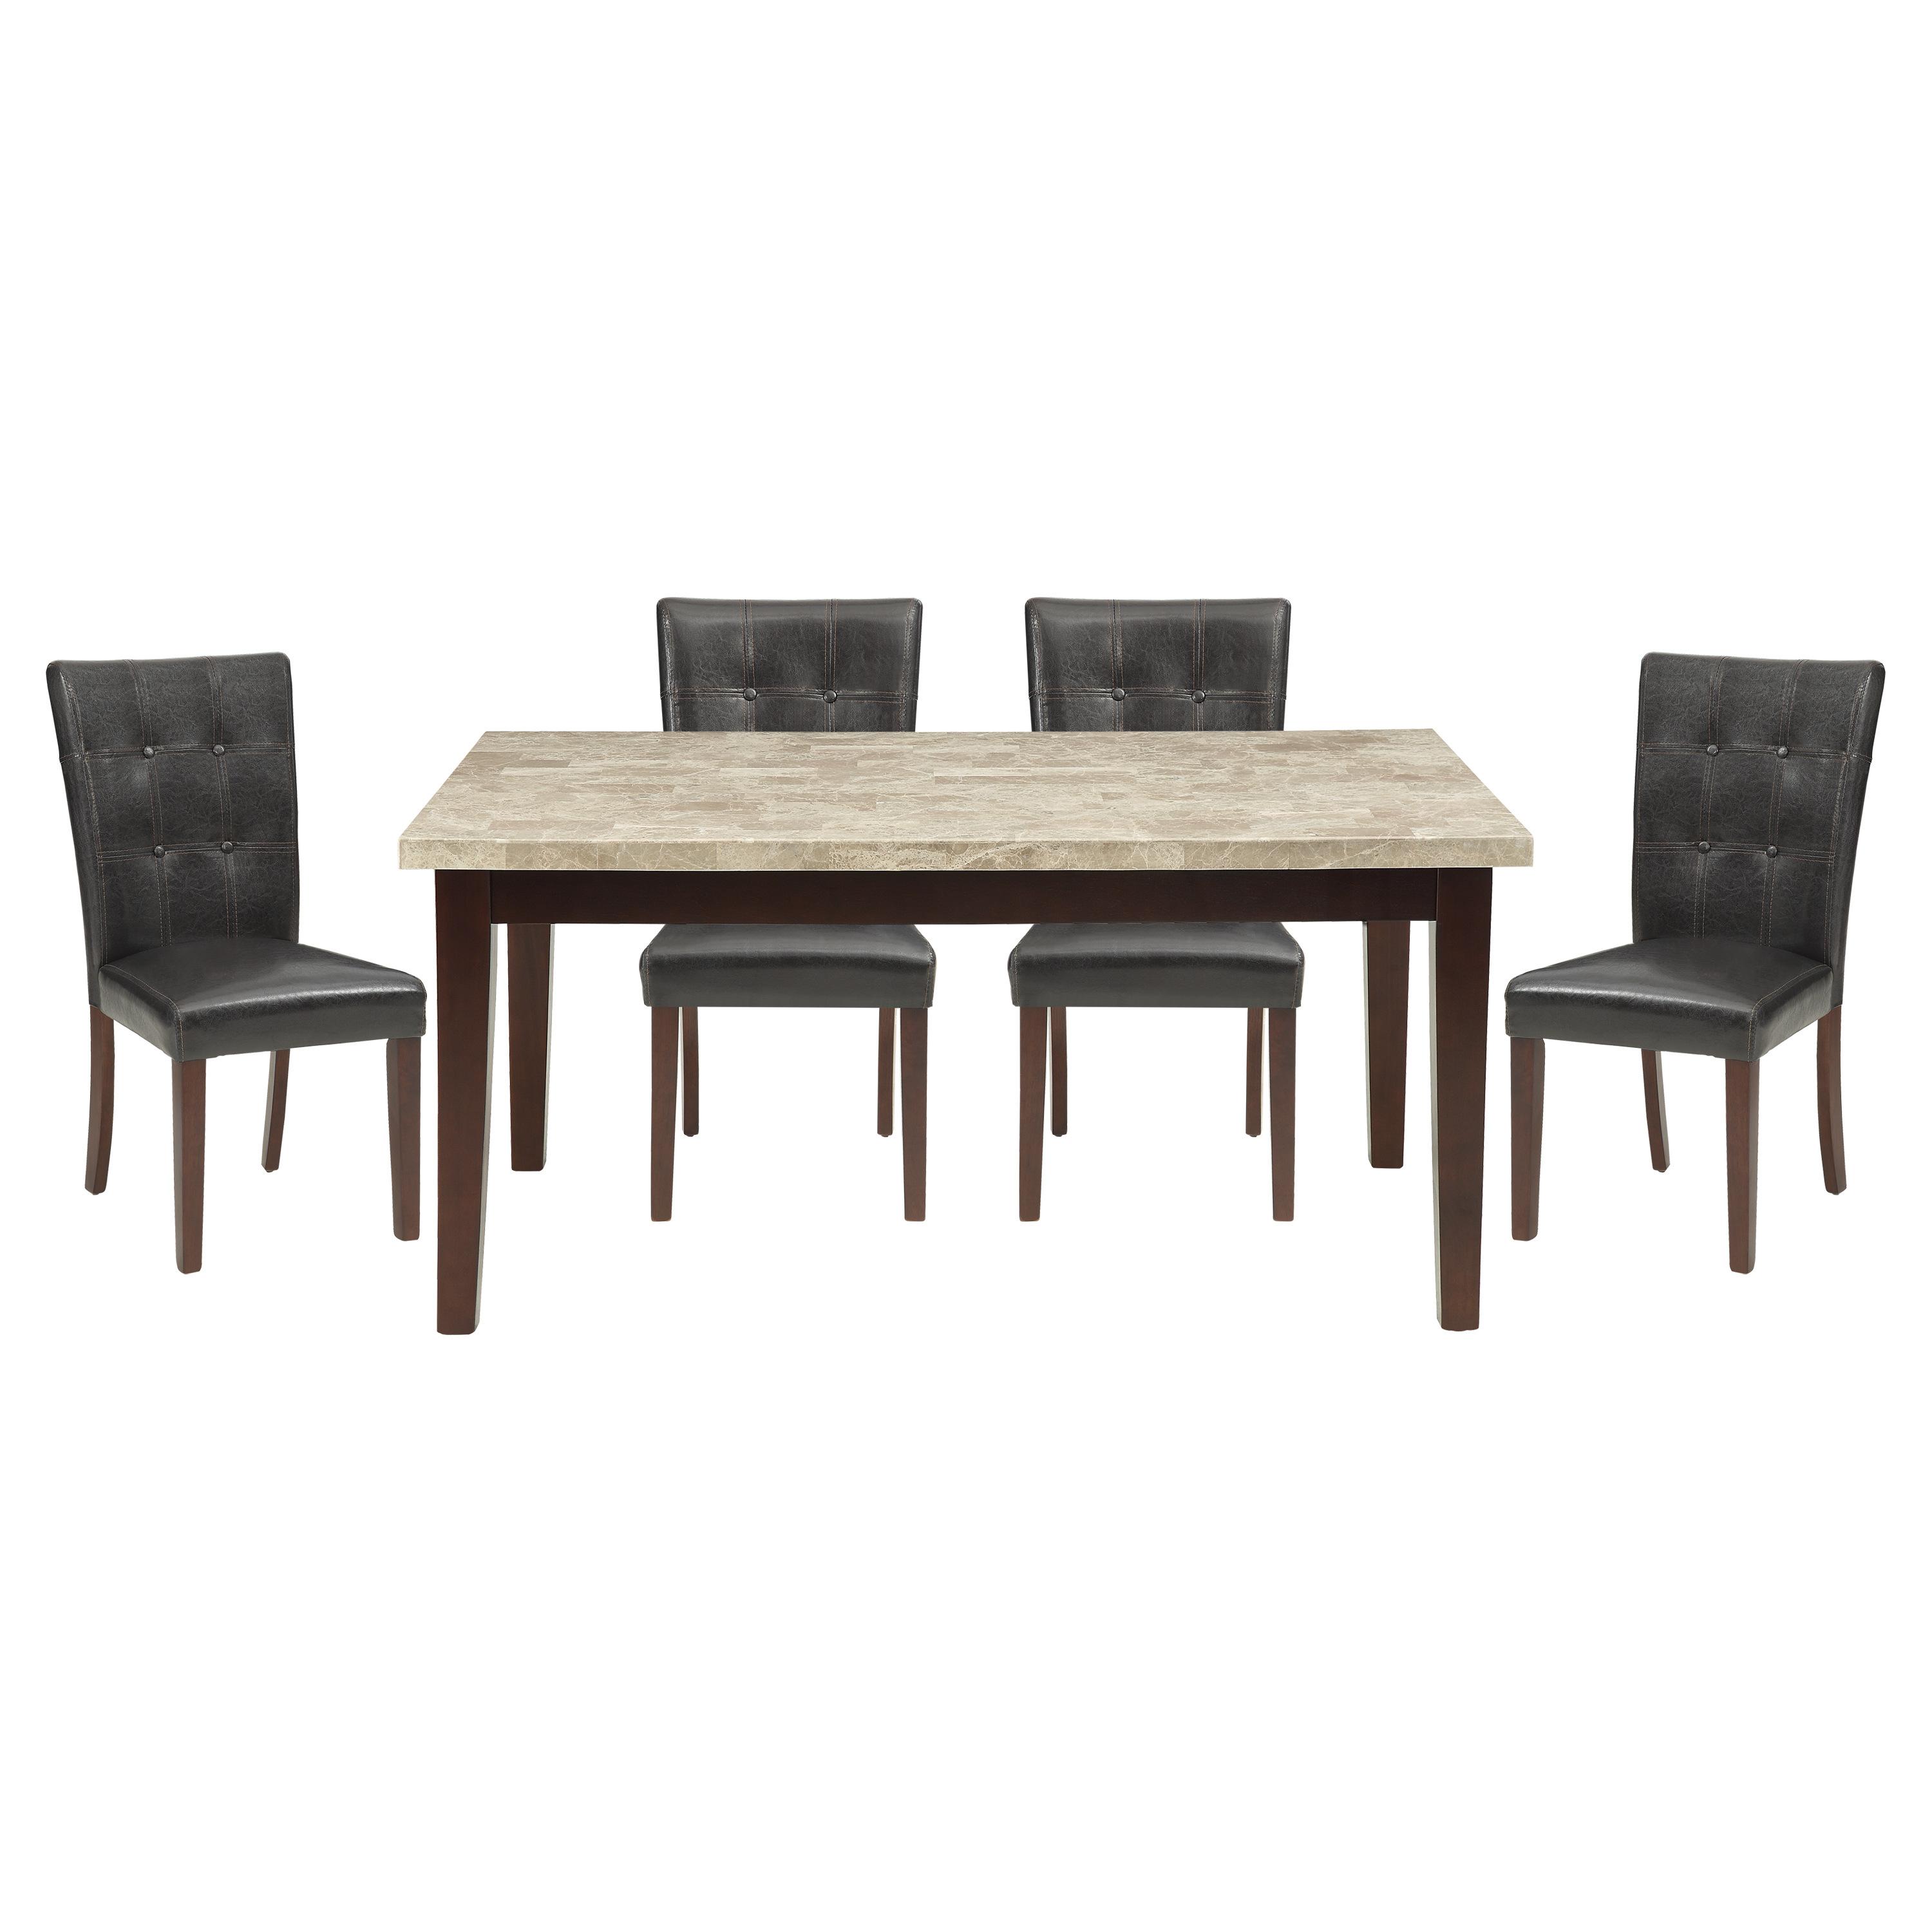 Transitional Dining Room Set 2456-64WM*5PC Decatur 2456-64WM*5PC in Espresso, White Faux Leather